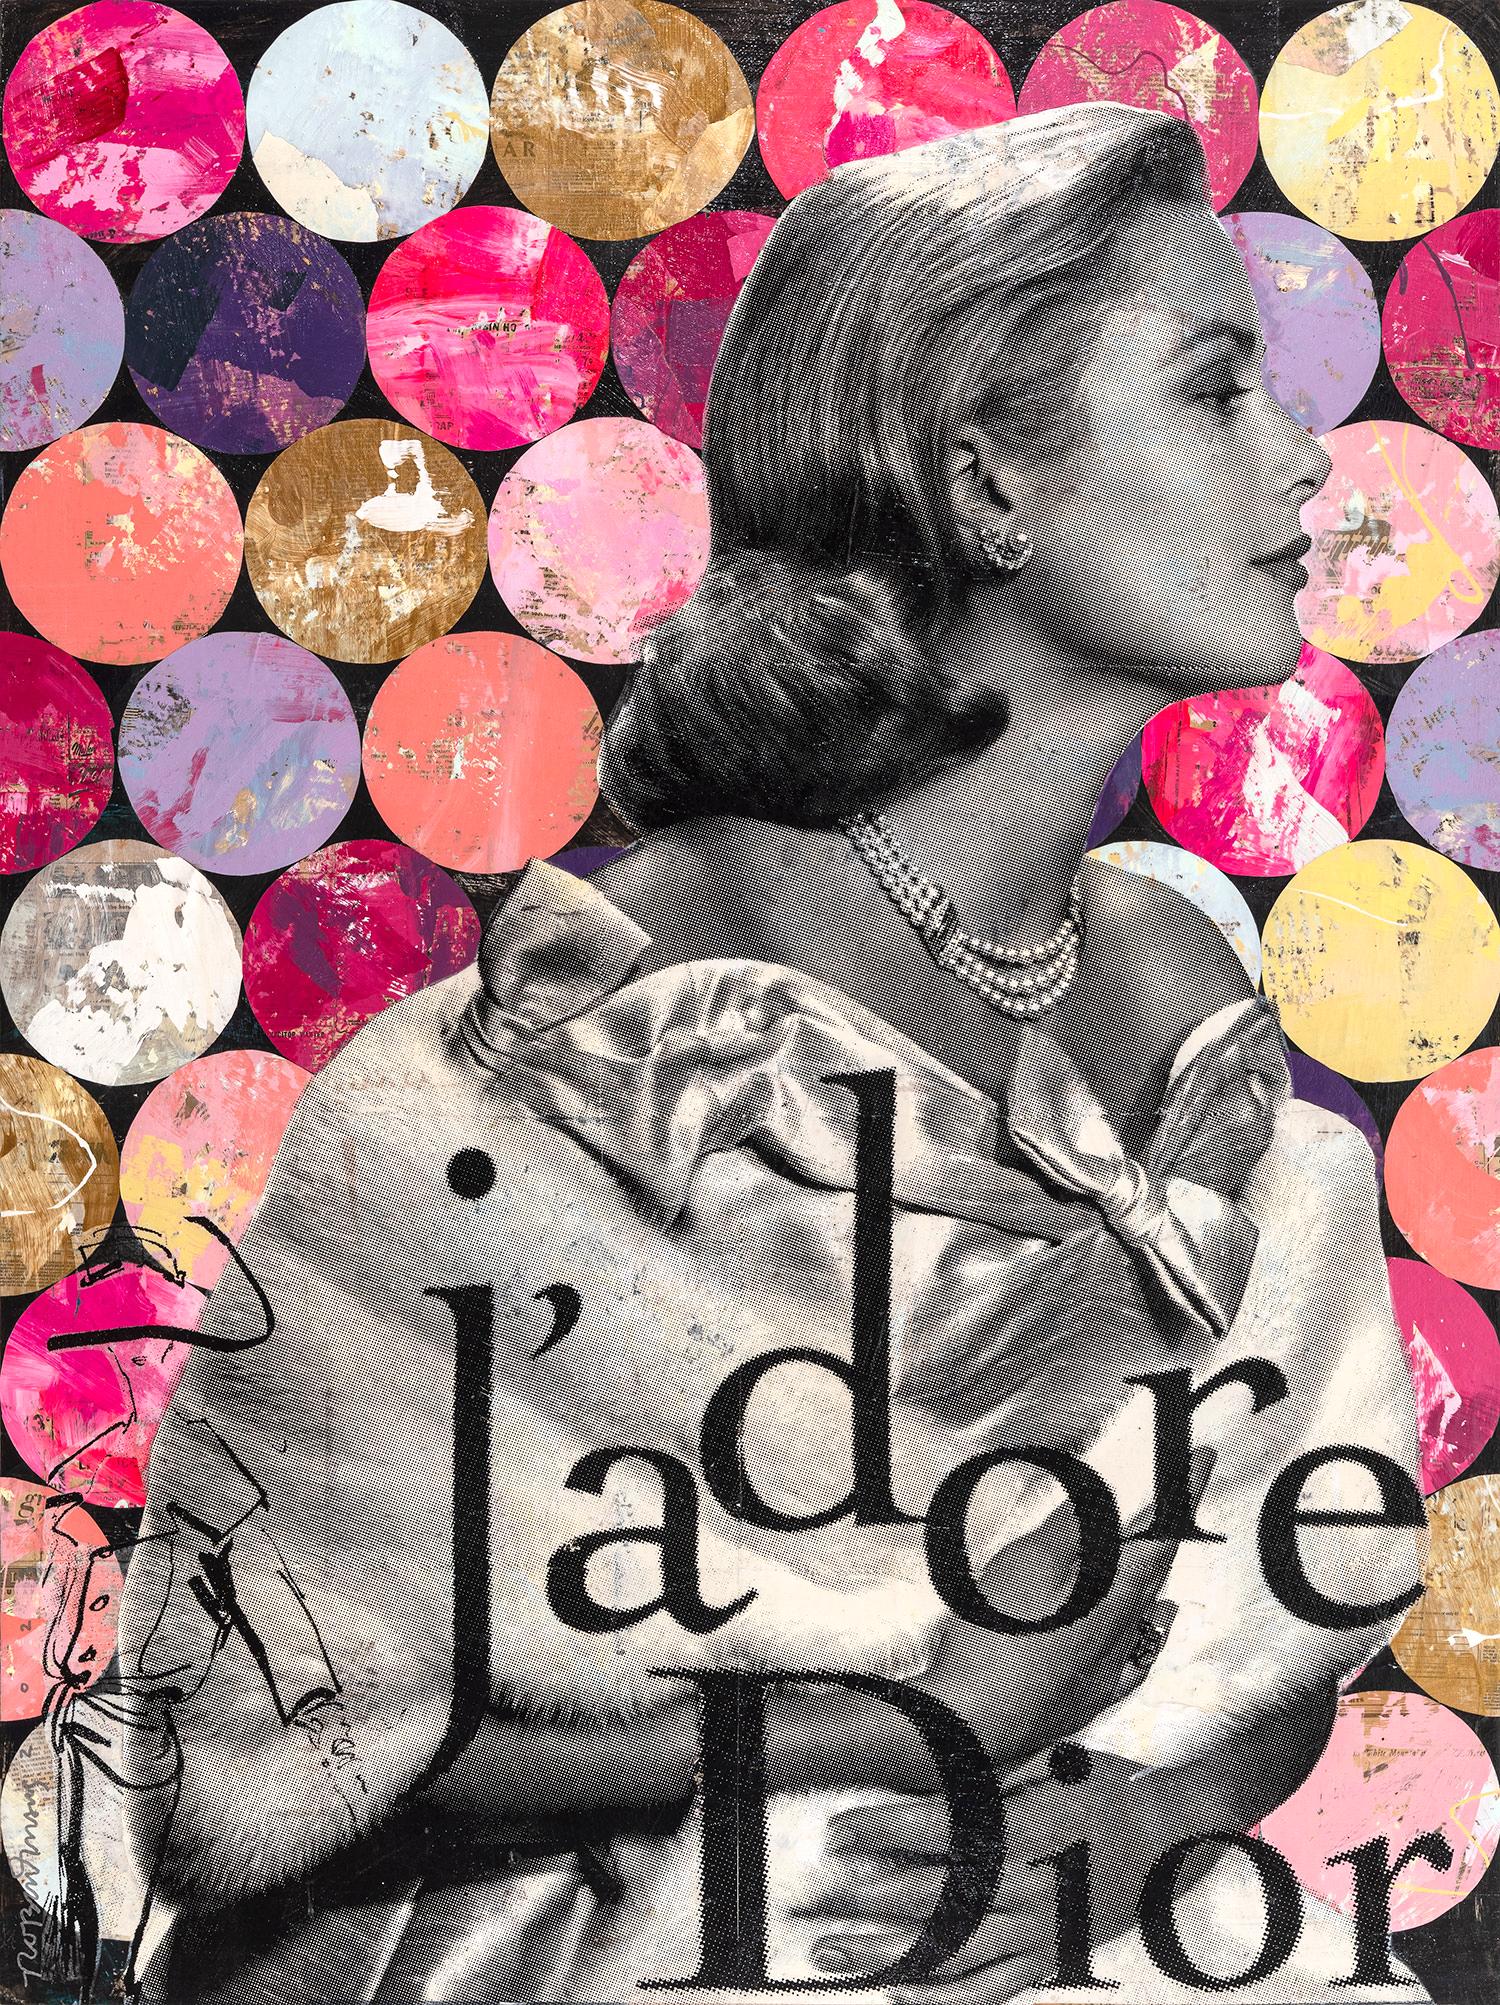 Robert Mars Figurative Painting - "You Look To Yours" Grace Kelly & J’adore Collage Composition on Panel Board